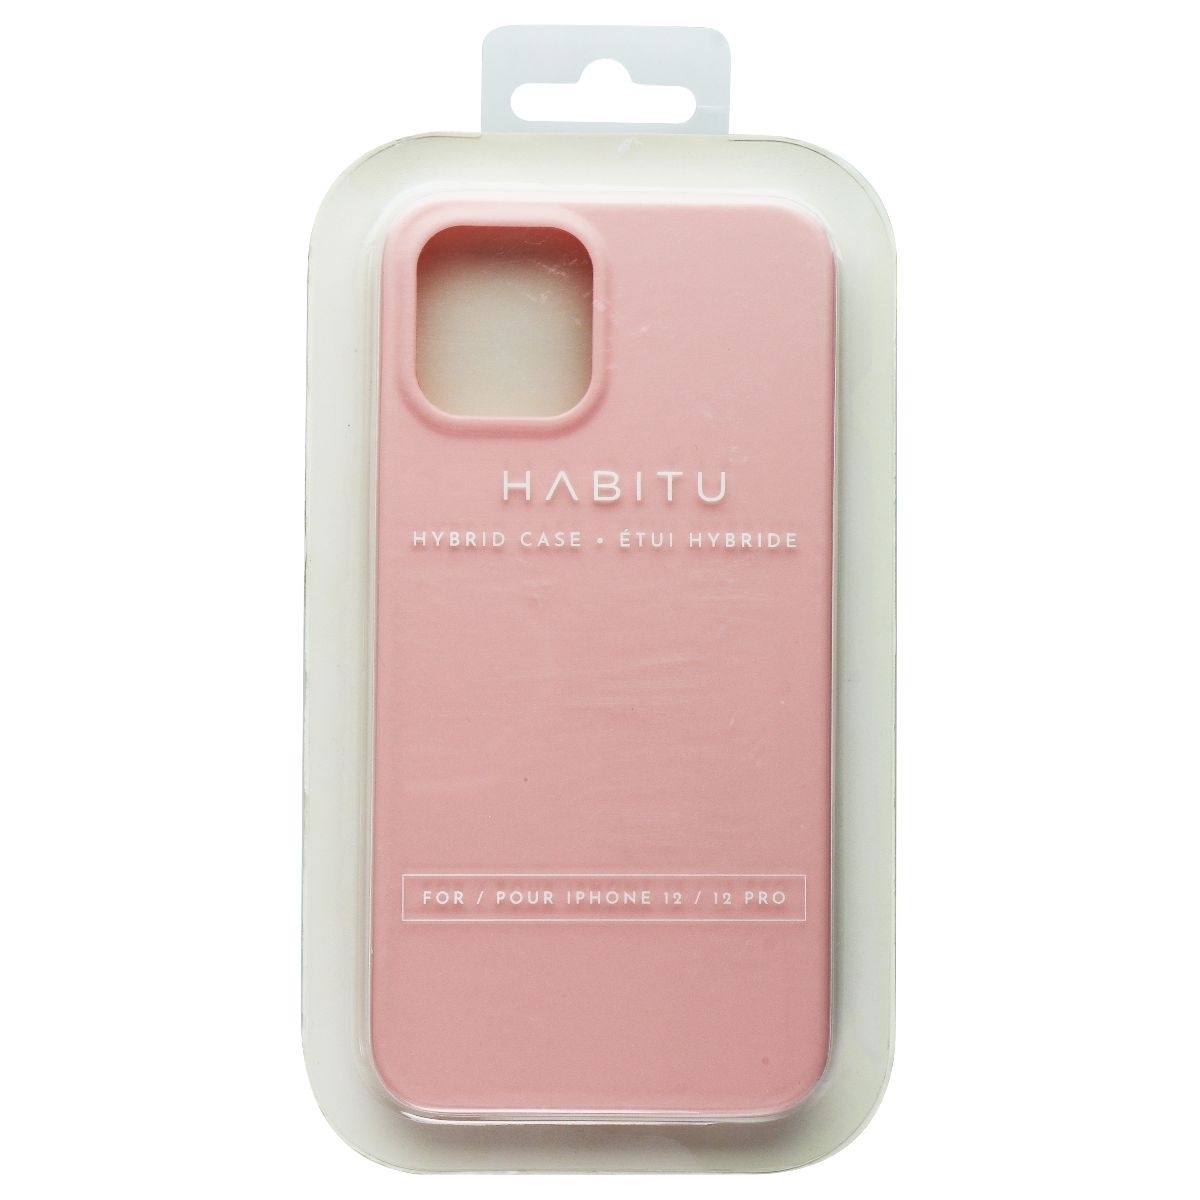 Habitu Hybrid Case For Apple IPhone 12 And IPhone 12 Pro - Pink (Refurbished)